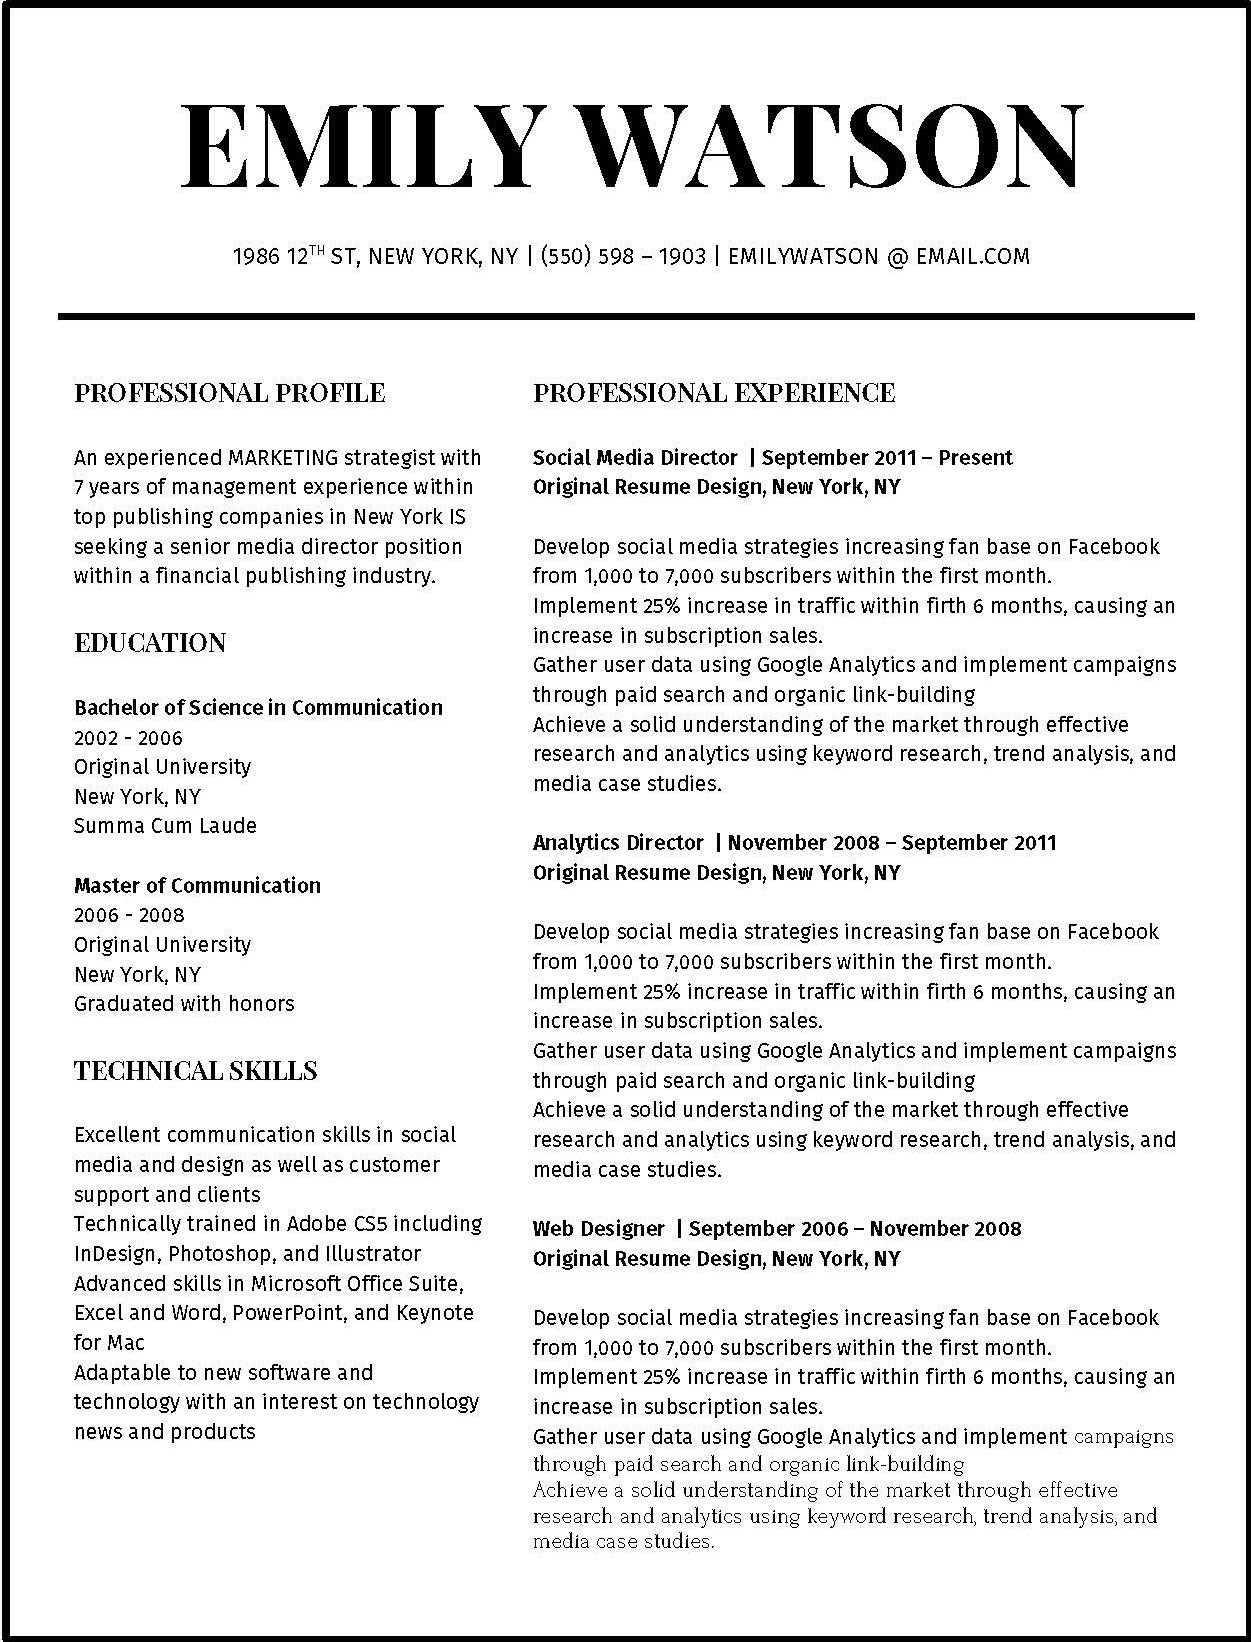 Emily Watson - Resume Template for Word - 5 Best Clean Resume Templates